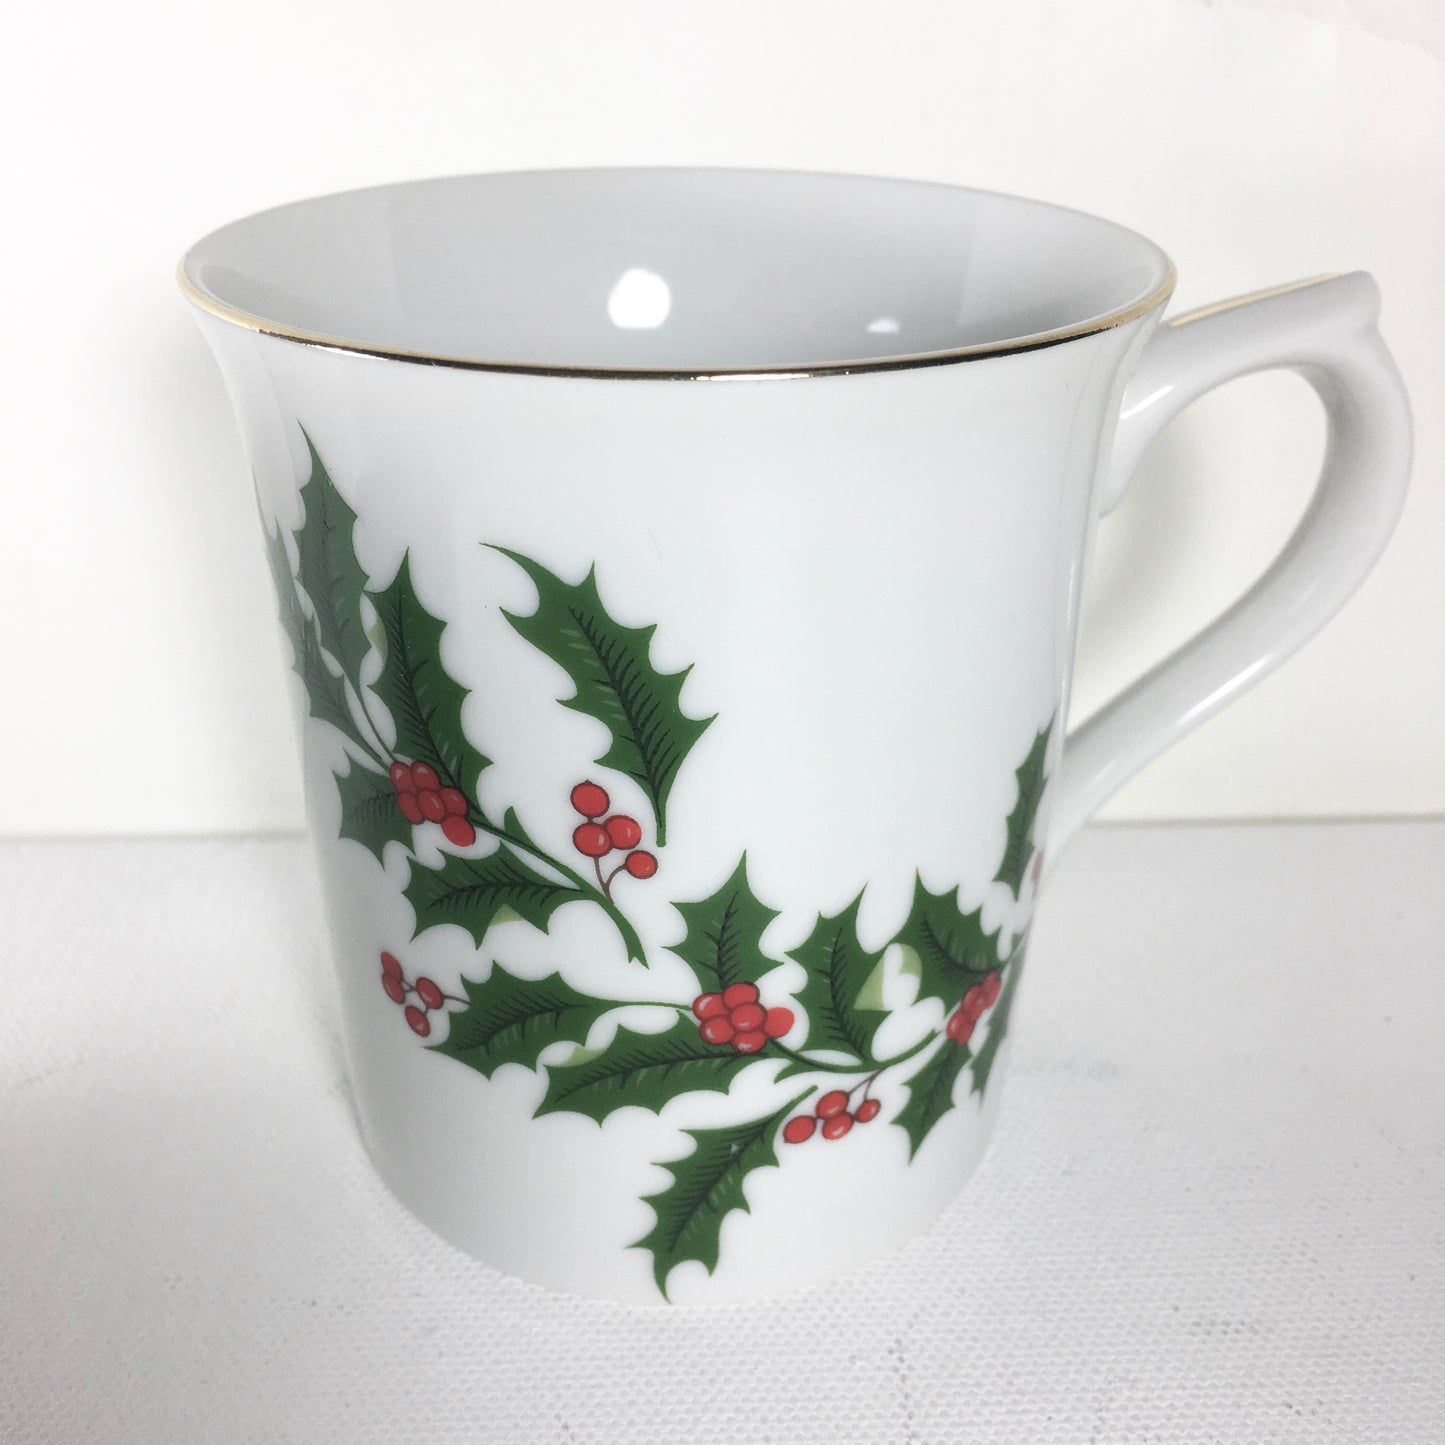 Set of four vintage porcelain holiday mugs, the Trimmings, Christmas Decor